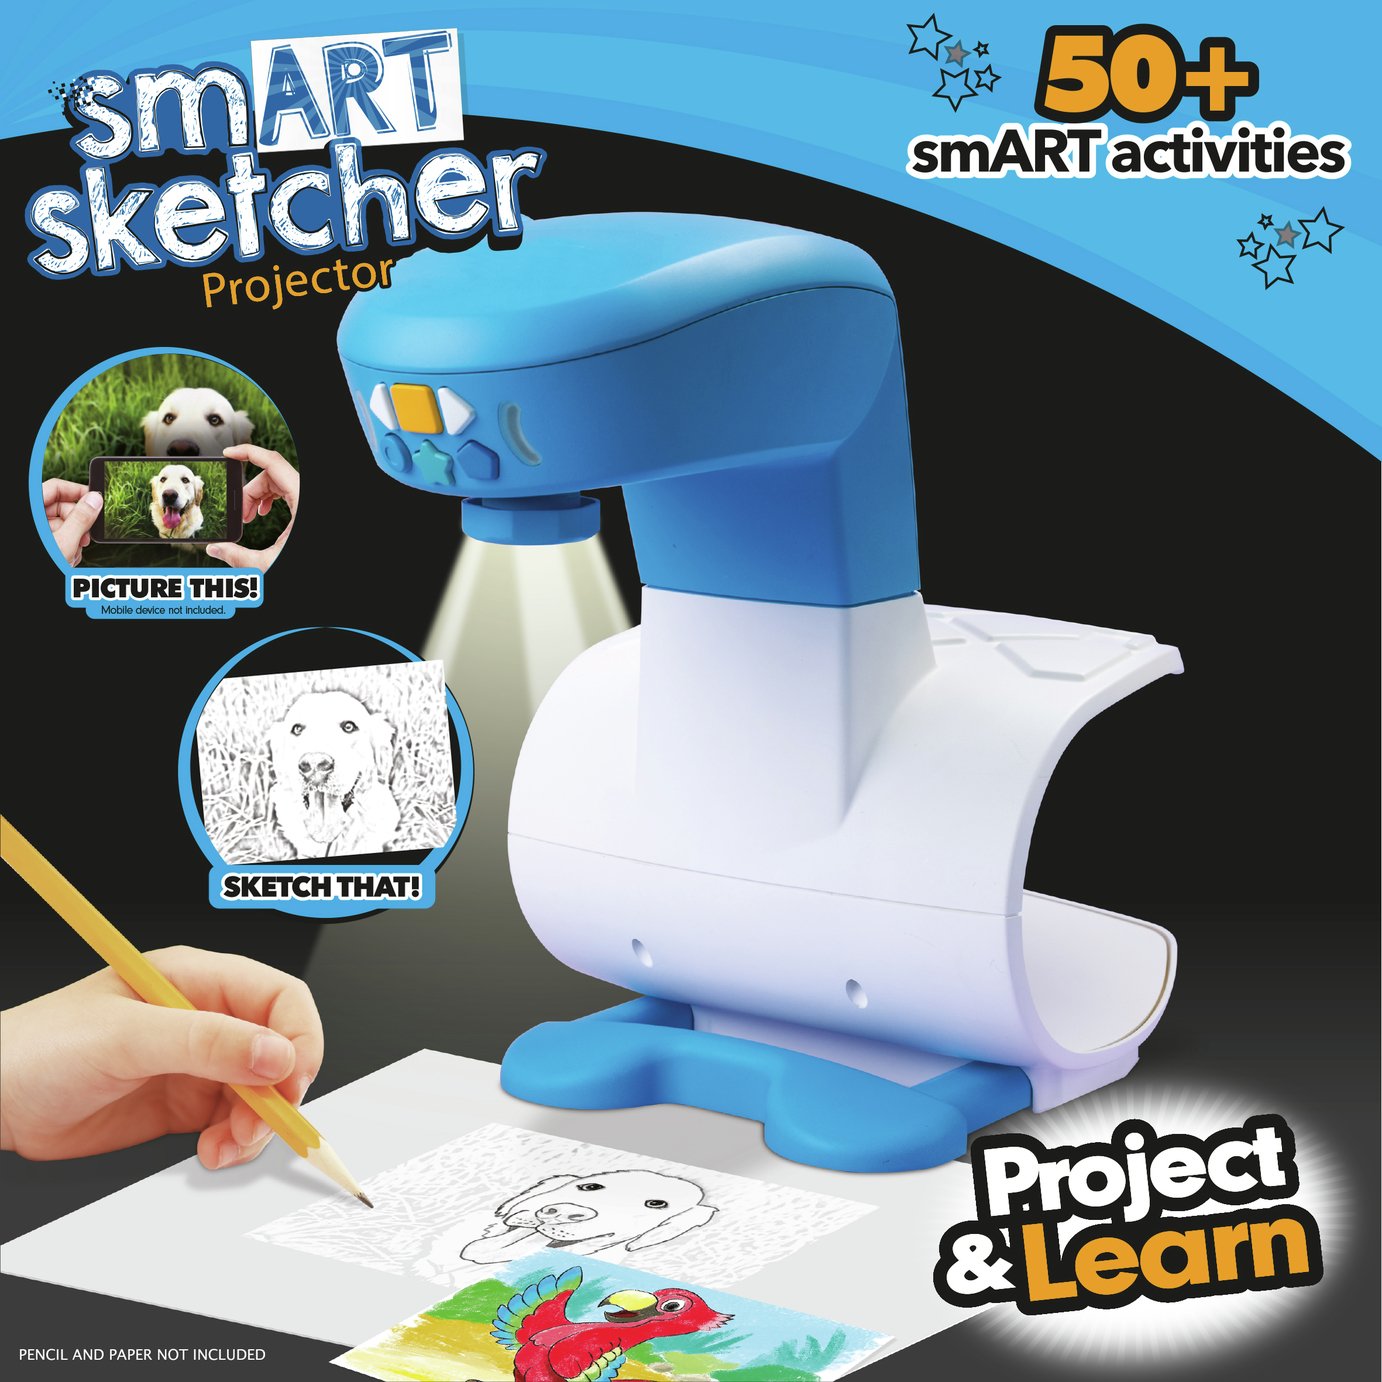 where can i buy a smart sketcher